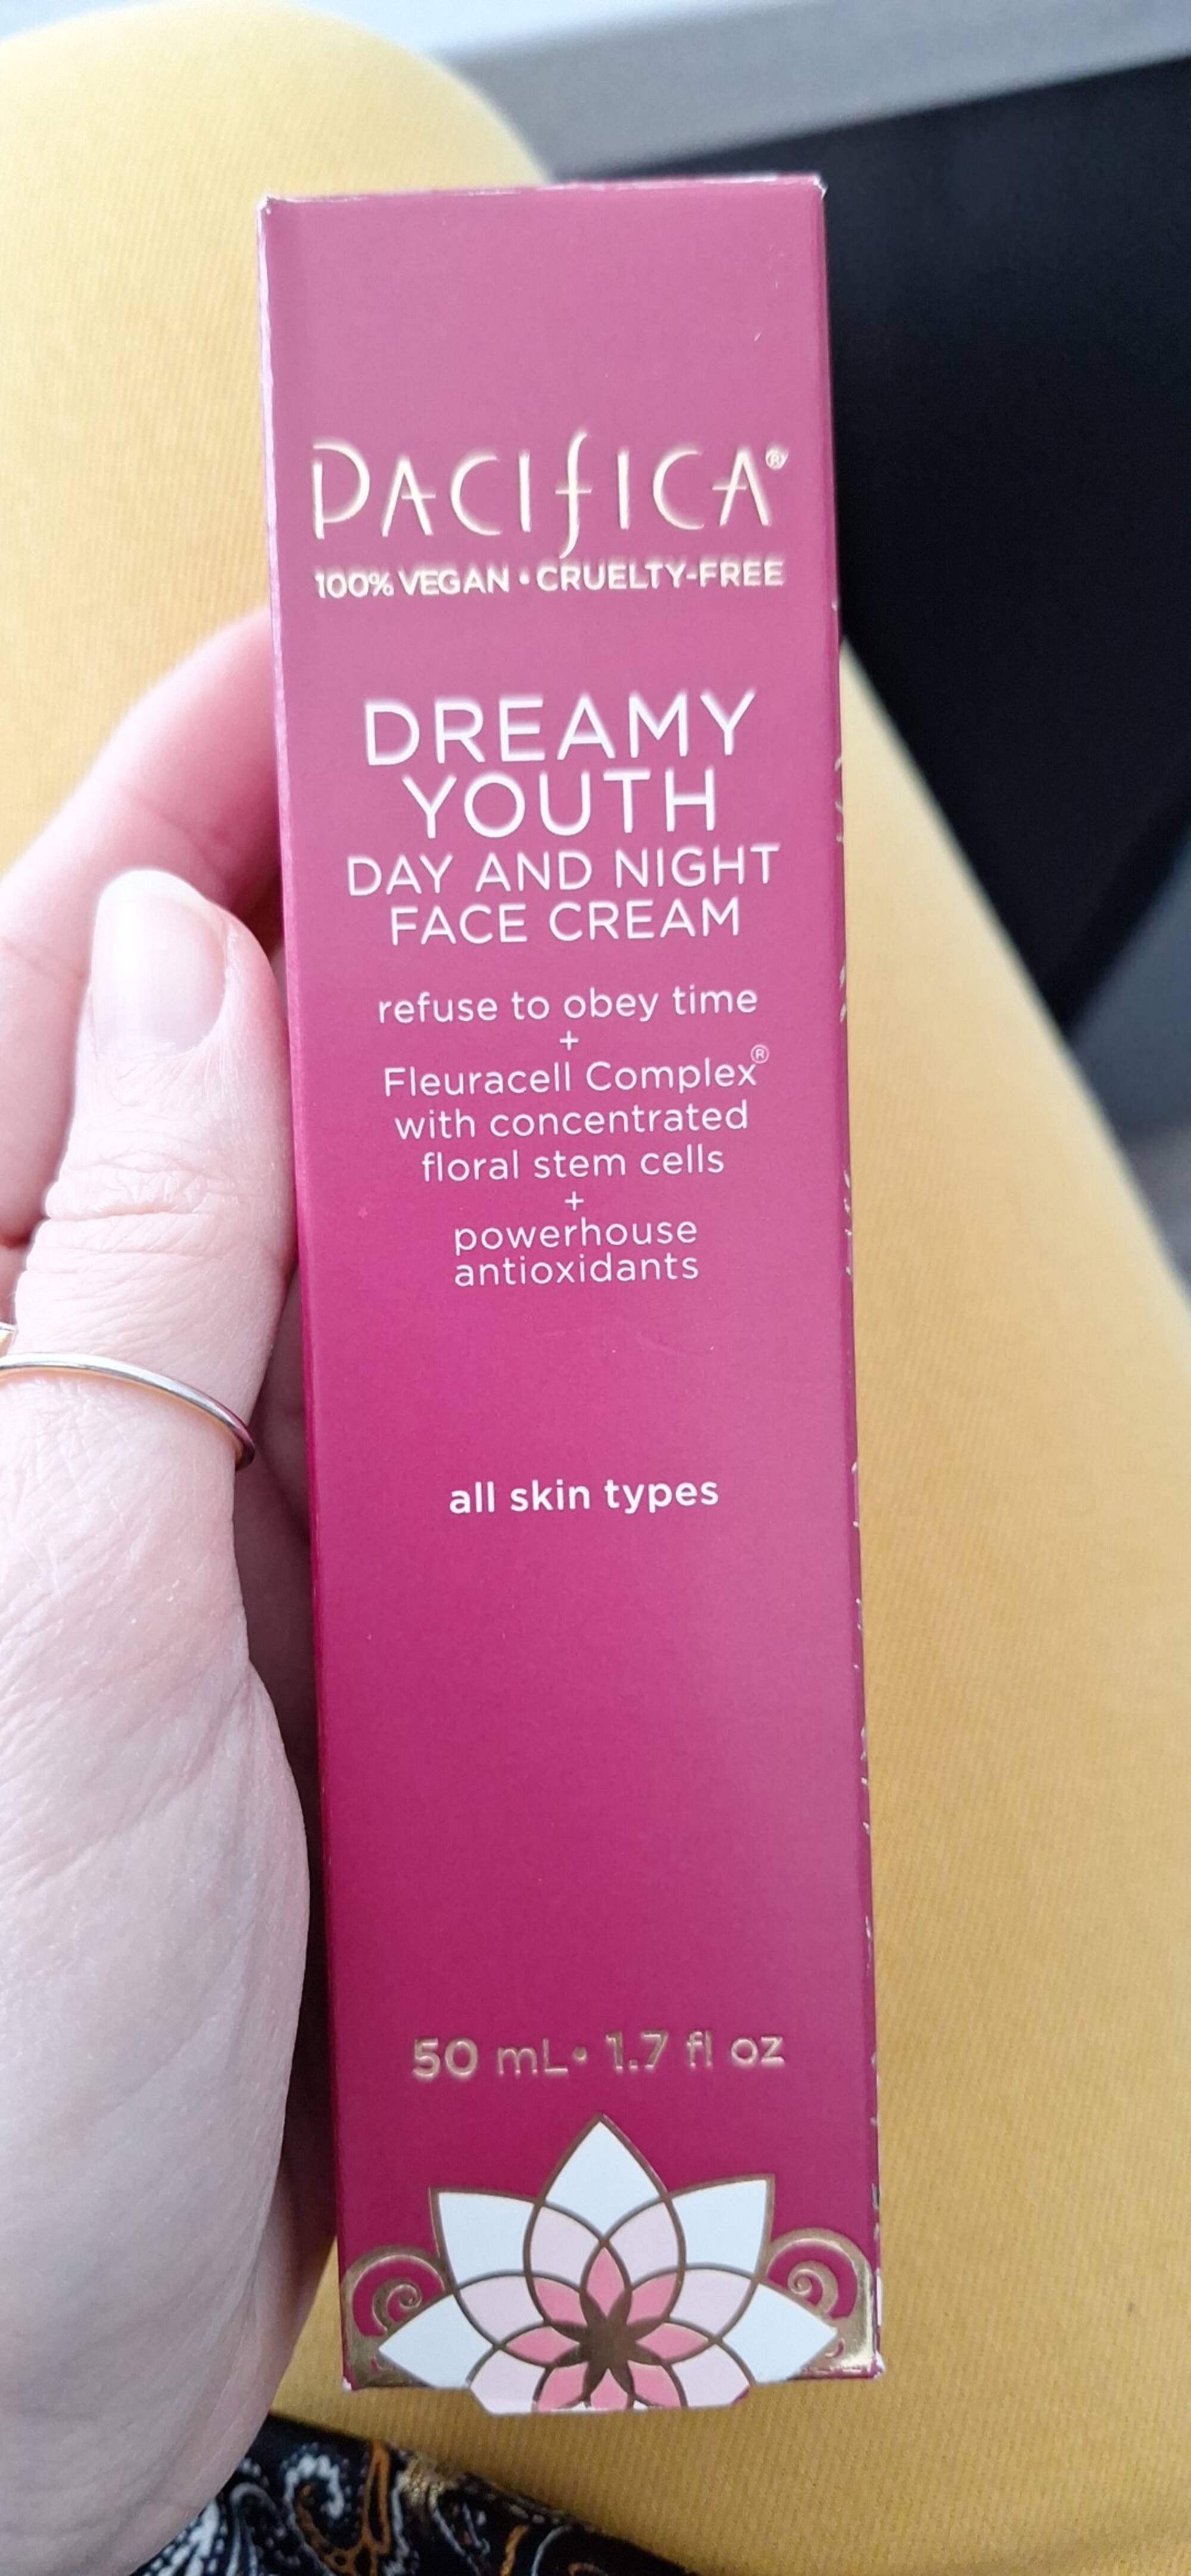 PACIFICA - Dreamy youth - Day and night face cream